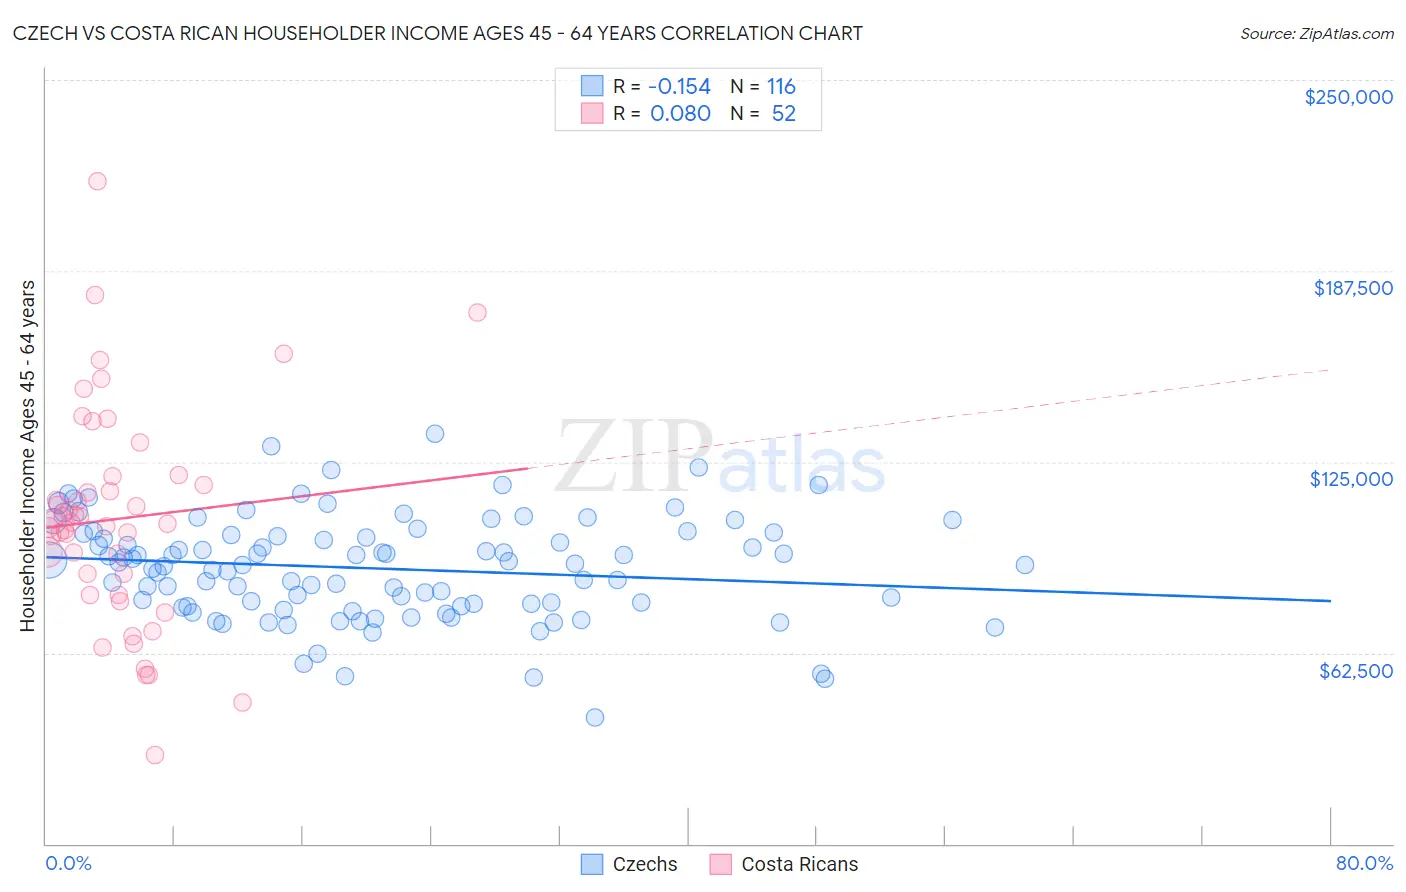 Czech vs Costa Rican Householder Income Ages 45 - 64 years